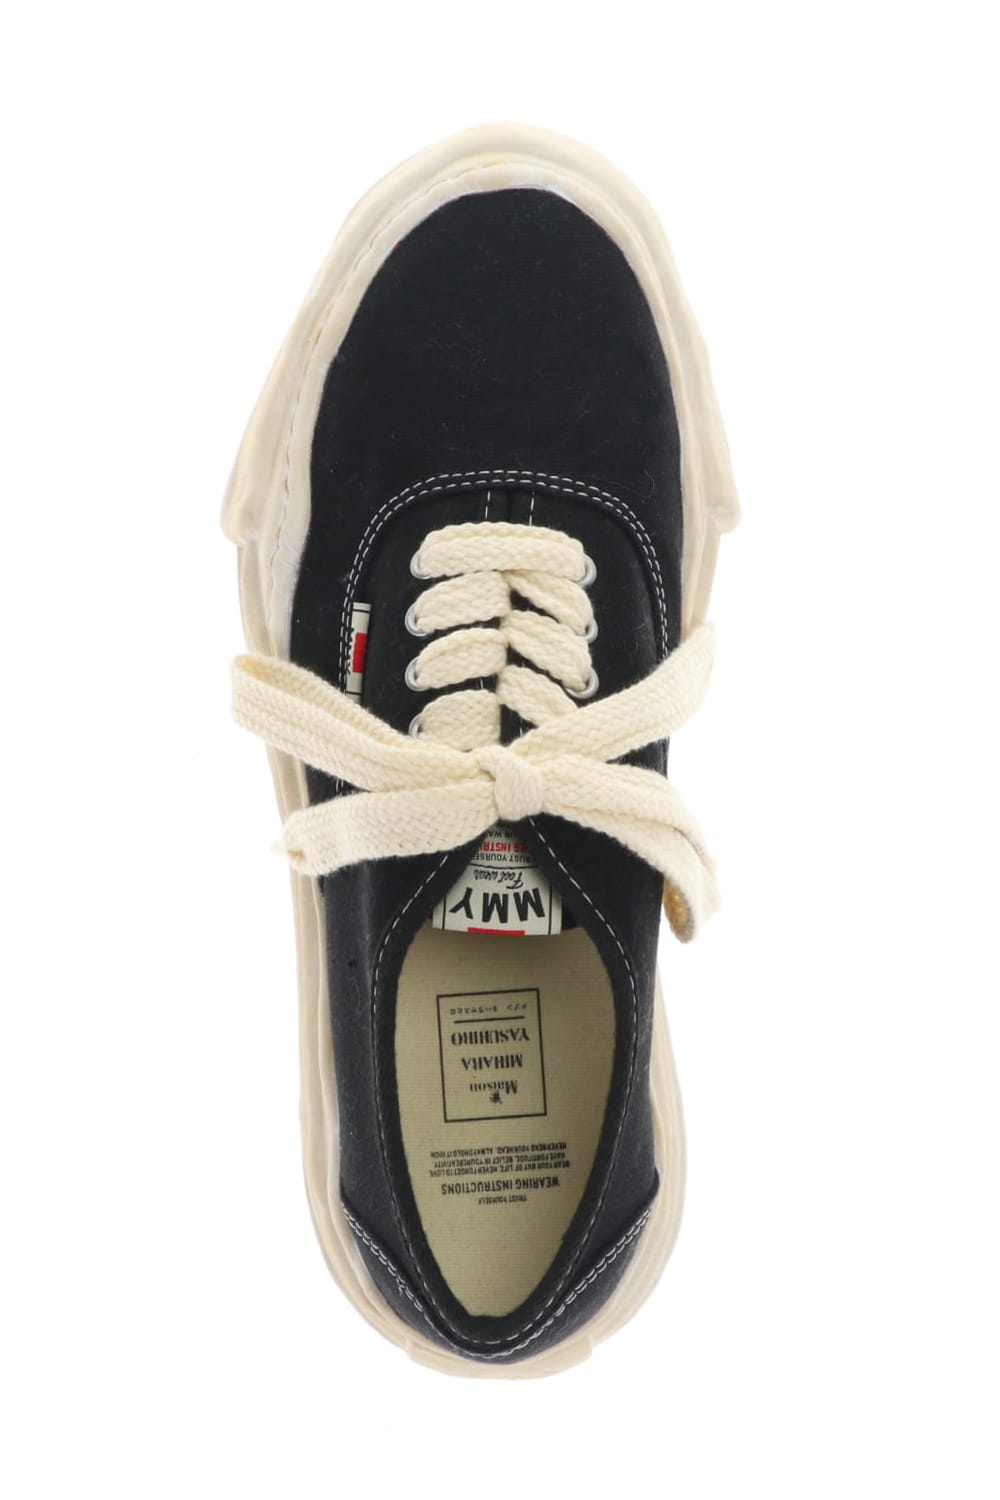 -BAKER- Over-dyed original sole canvas Low-Top sneakers Black